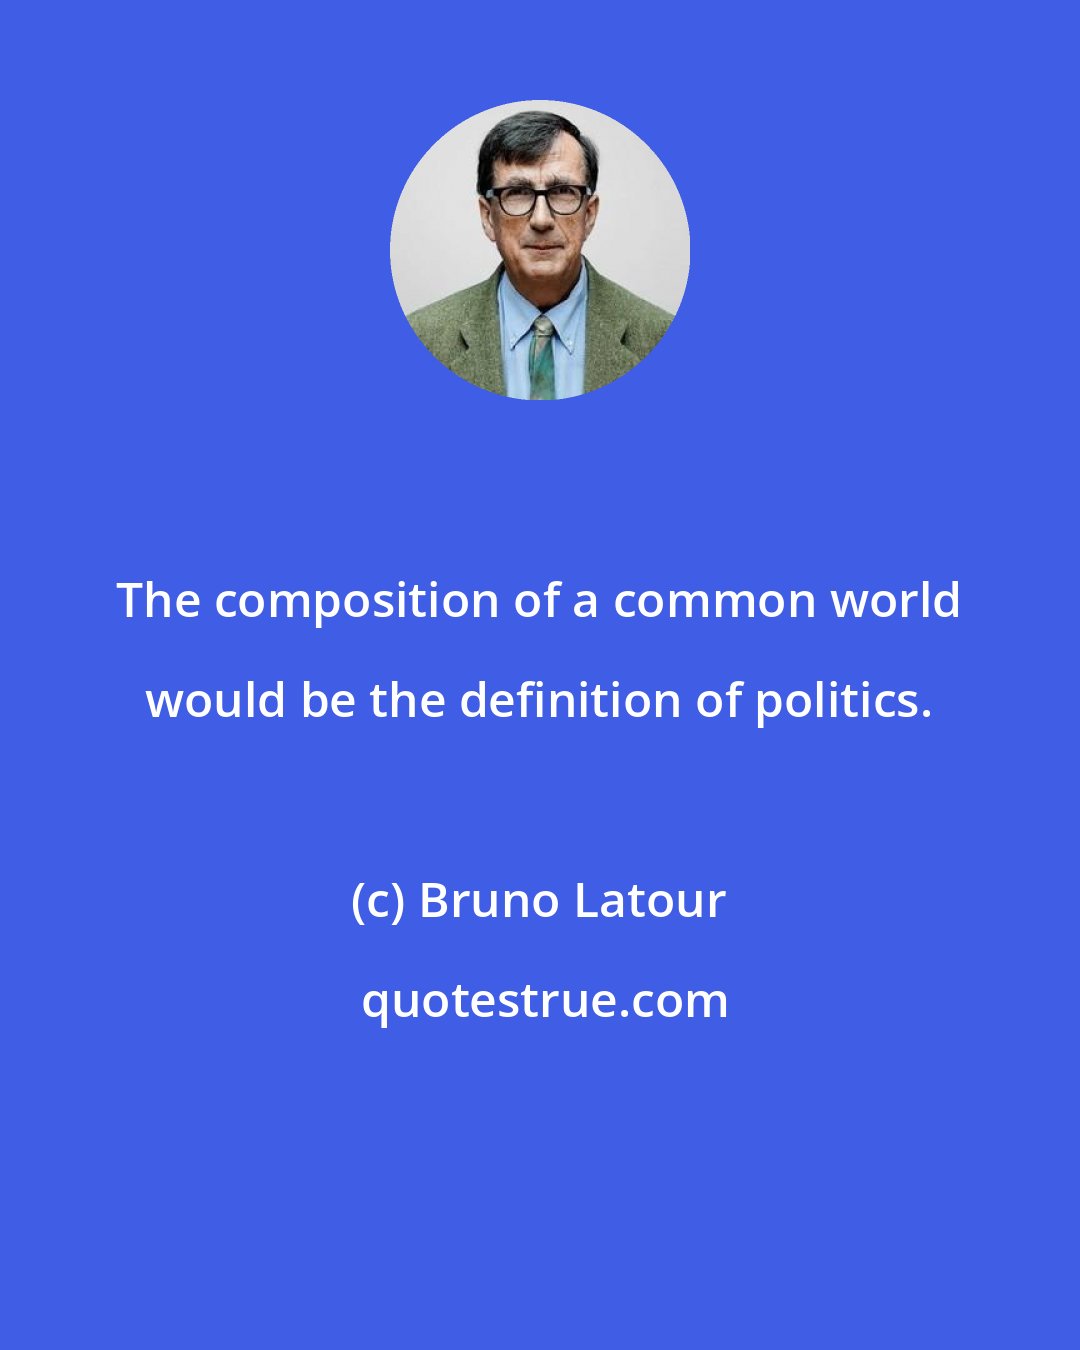 Bruno Latour: The composition of a common world would be the definition of politics.